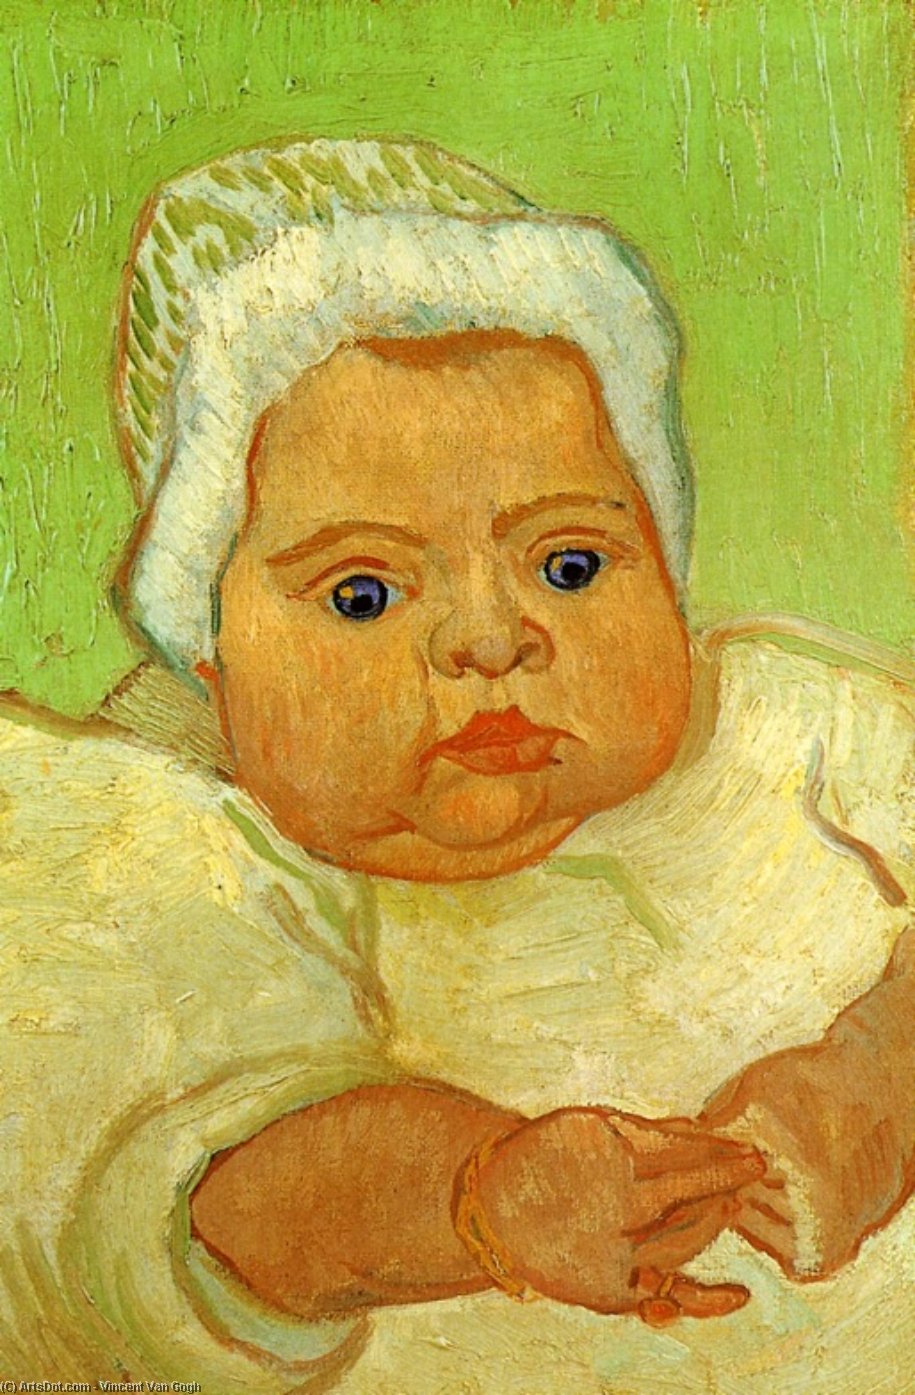  Museum Art Reproductions The Baby Marcelle Roulin, 1888 by Vincent Van Gogh (1853-1890, Netherlands) | ArtsDot.com